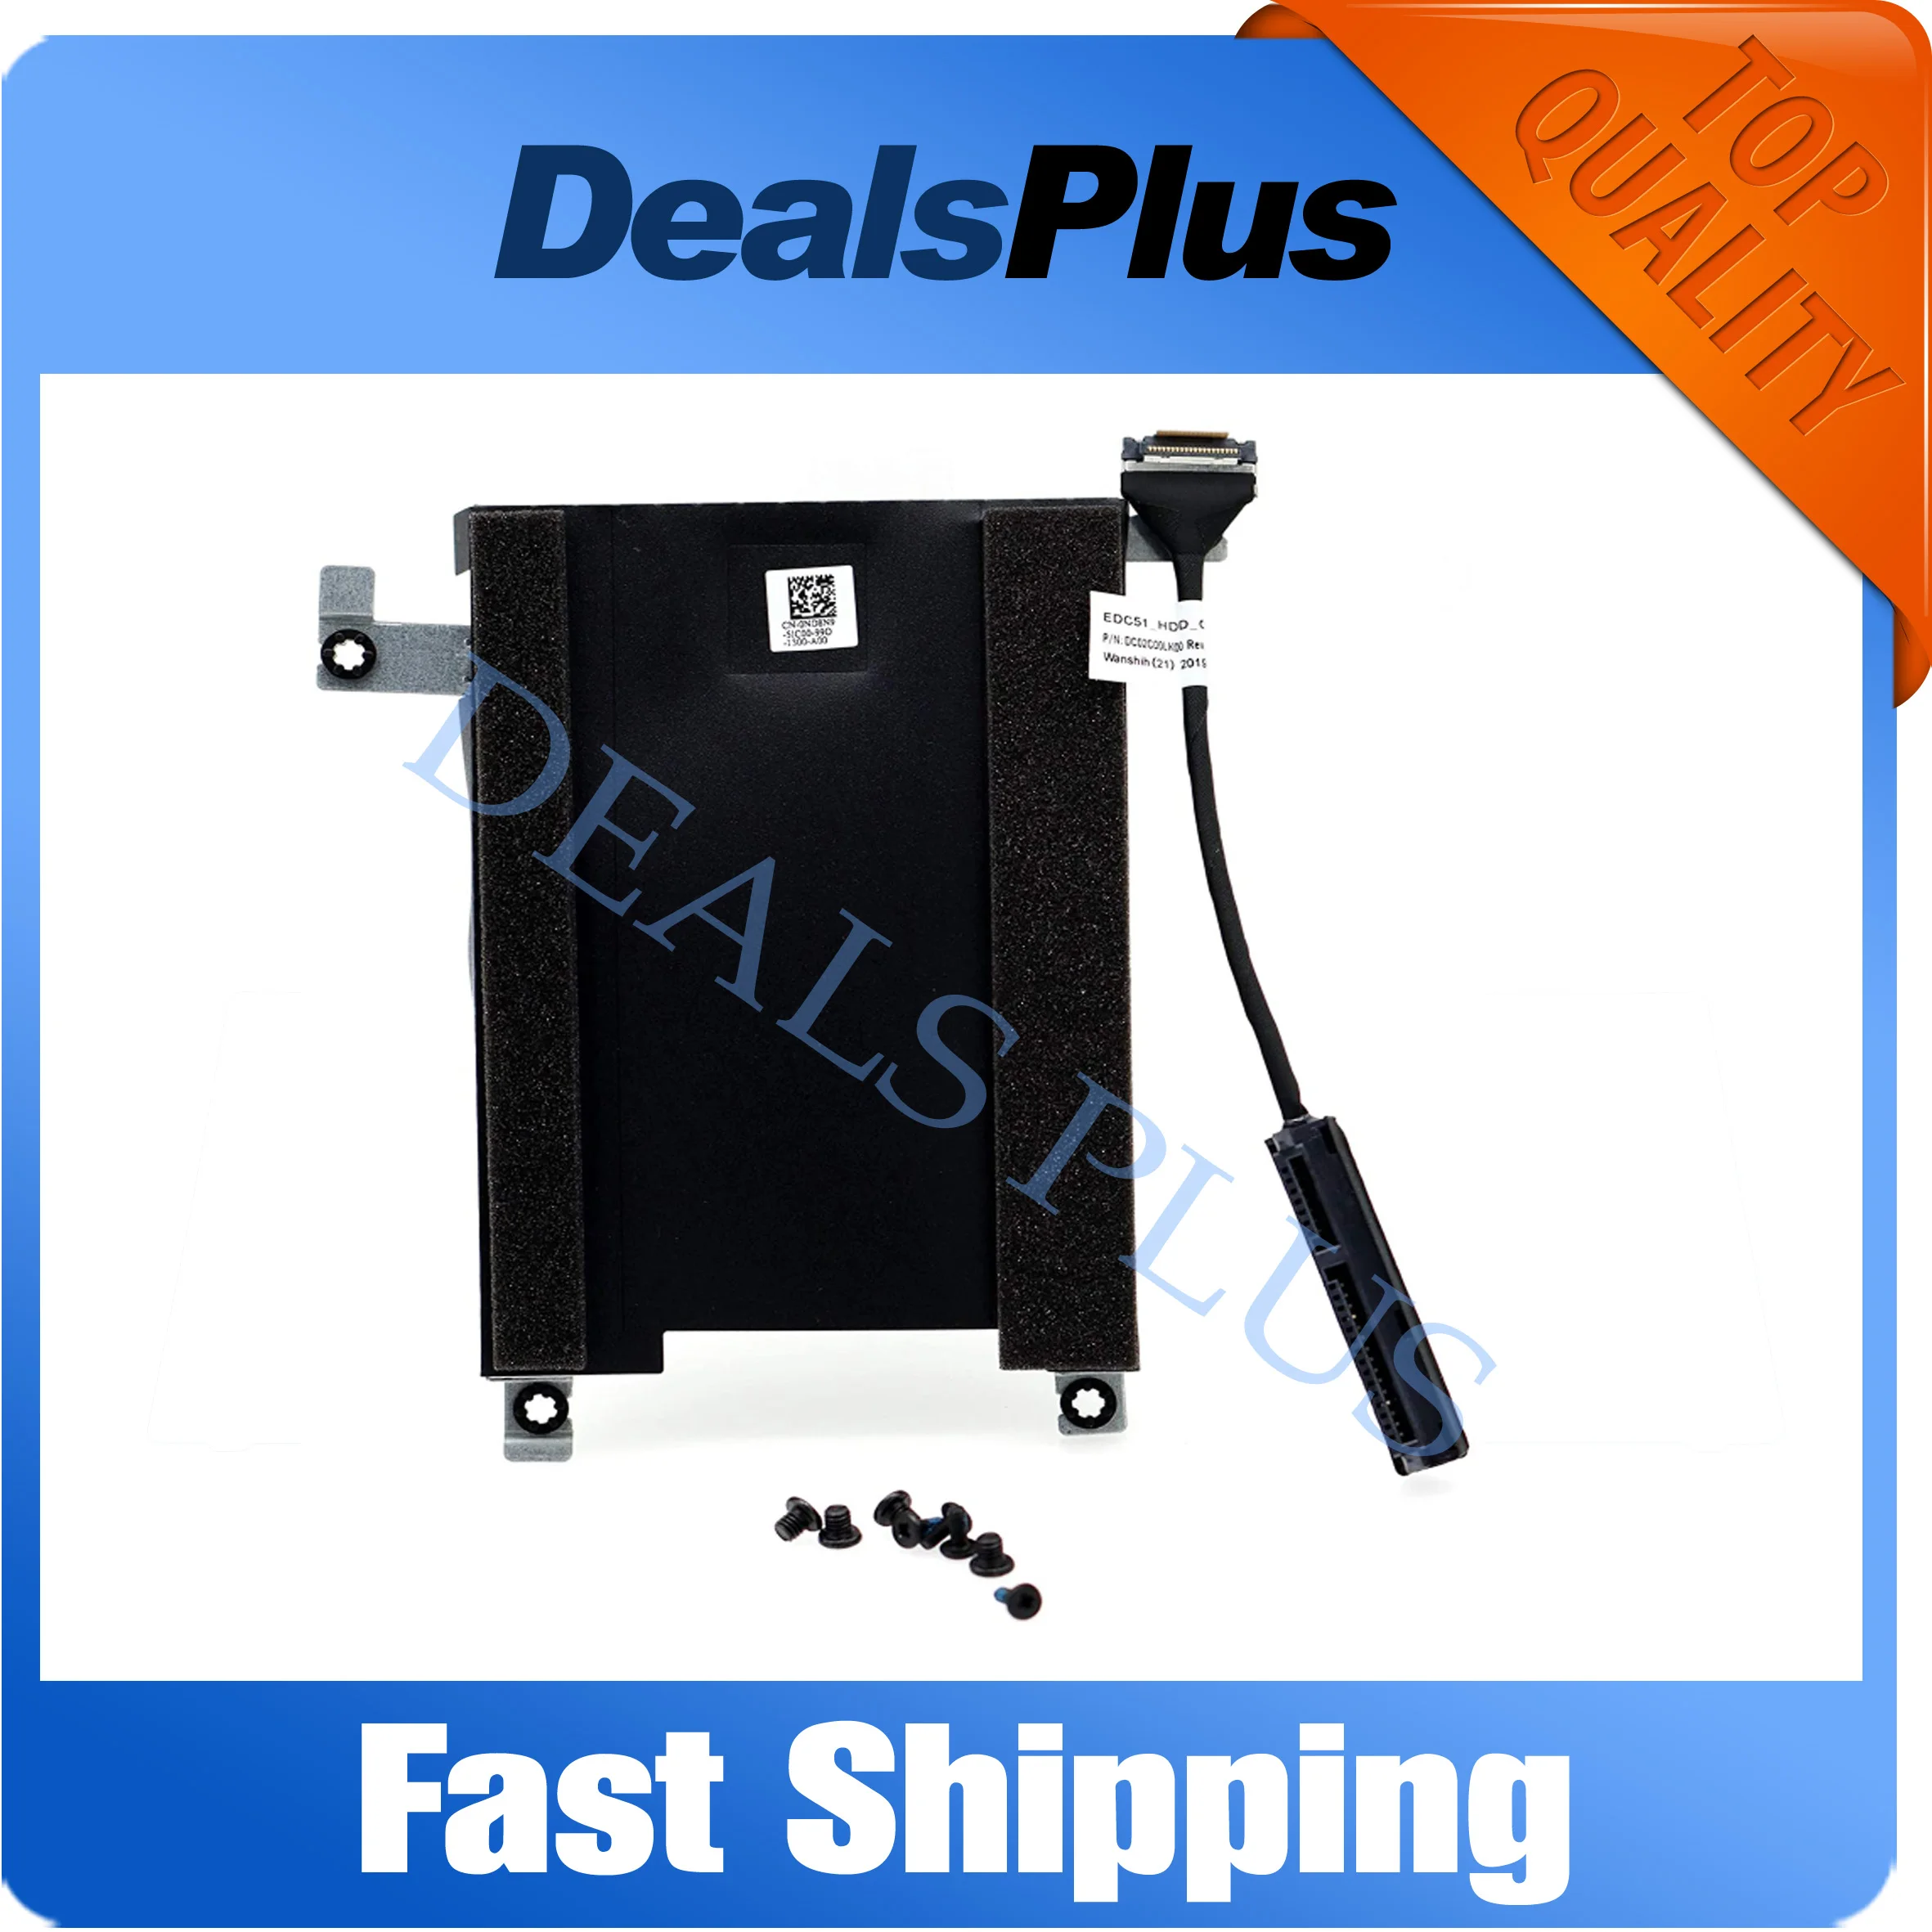 

New SSD SATA Hard Drive Cable 0XY5F7 XY5F7 + 2.5" HDD Caddy Bracket 0ND8N9 ND8N9 For Dell Precision 3540 3541 M3540 M3541